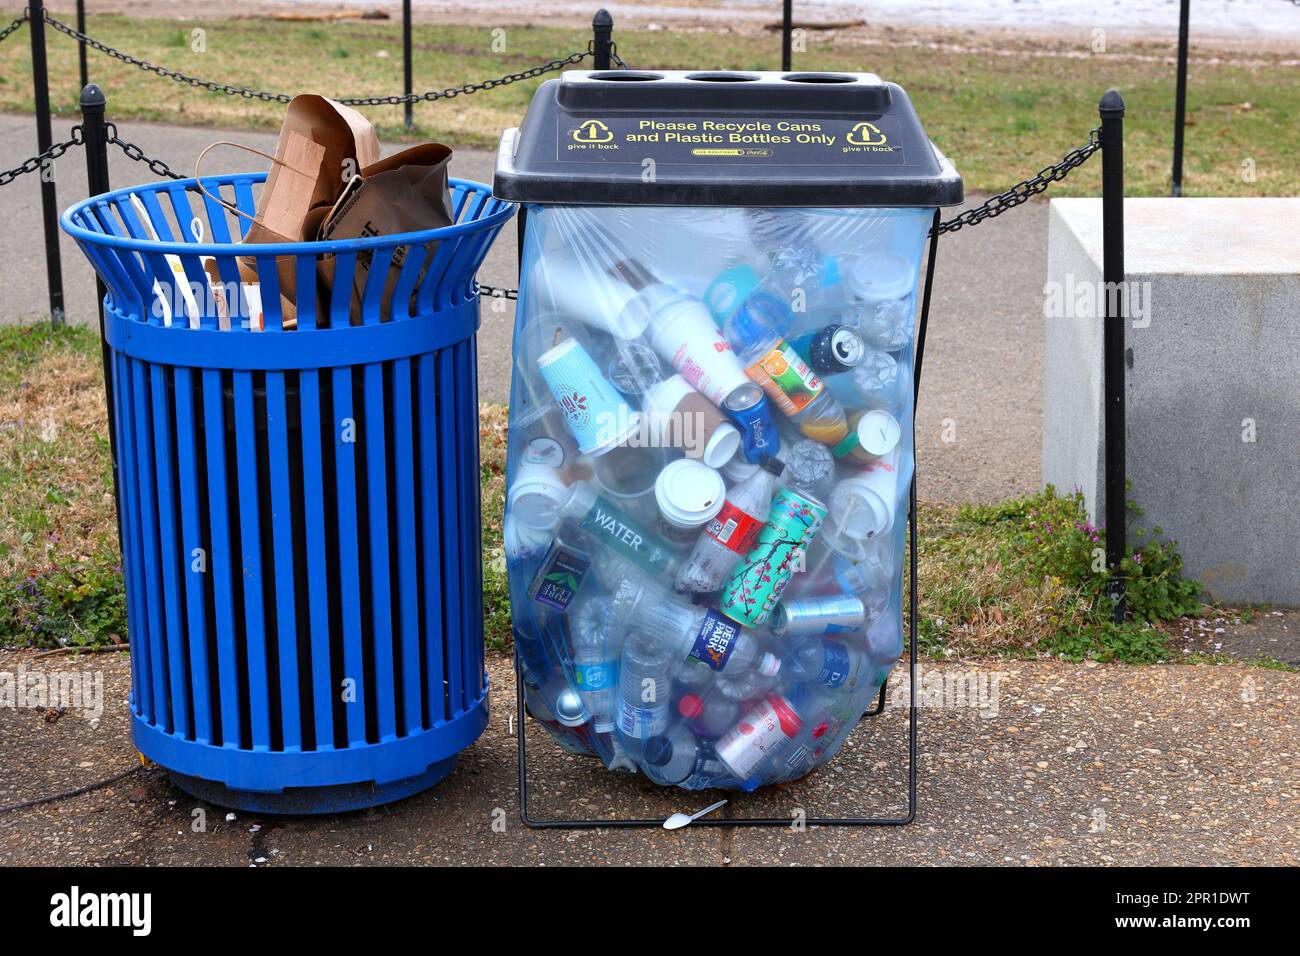 A trash can and a recycling bin. The designated recycling container filled with plastic bottles, cans, and non recyclable coffee cups and trash. Stock Photo